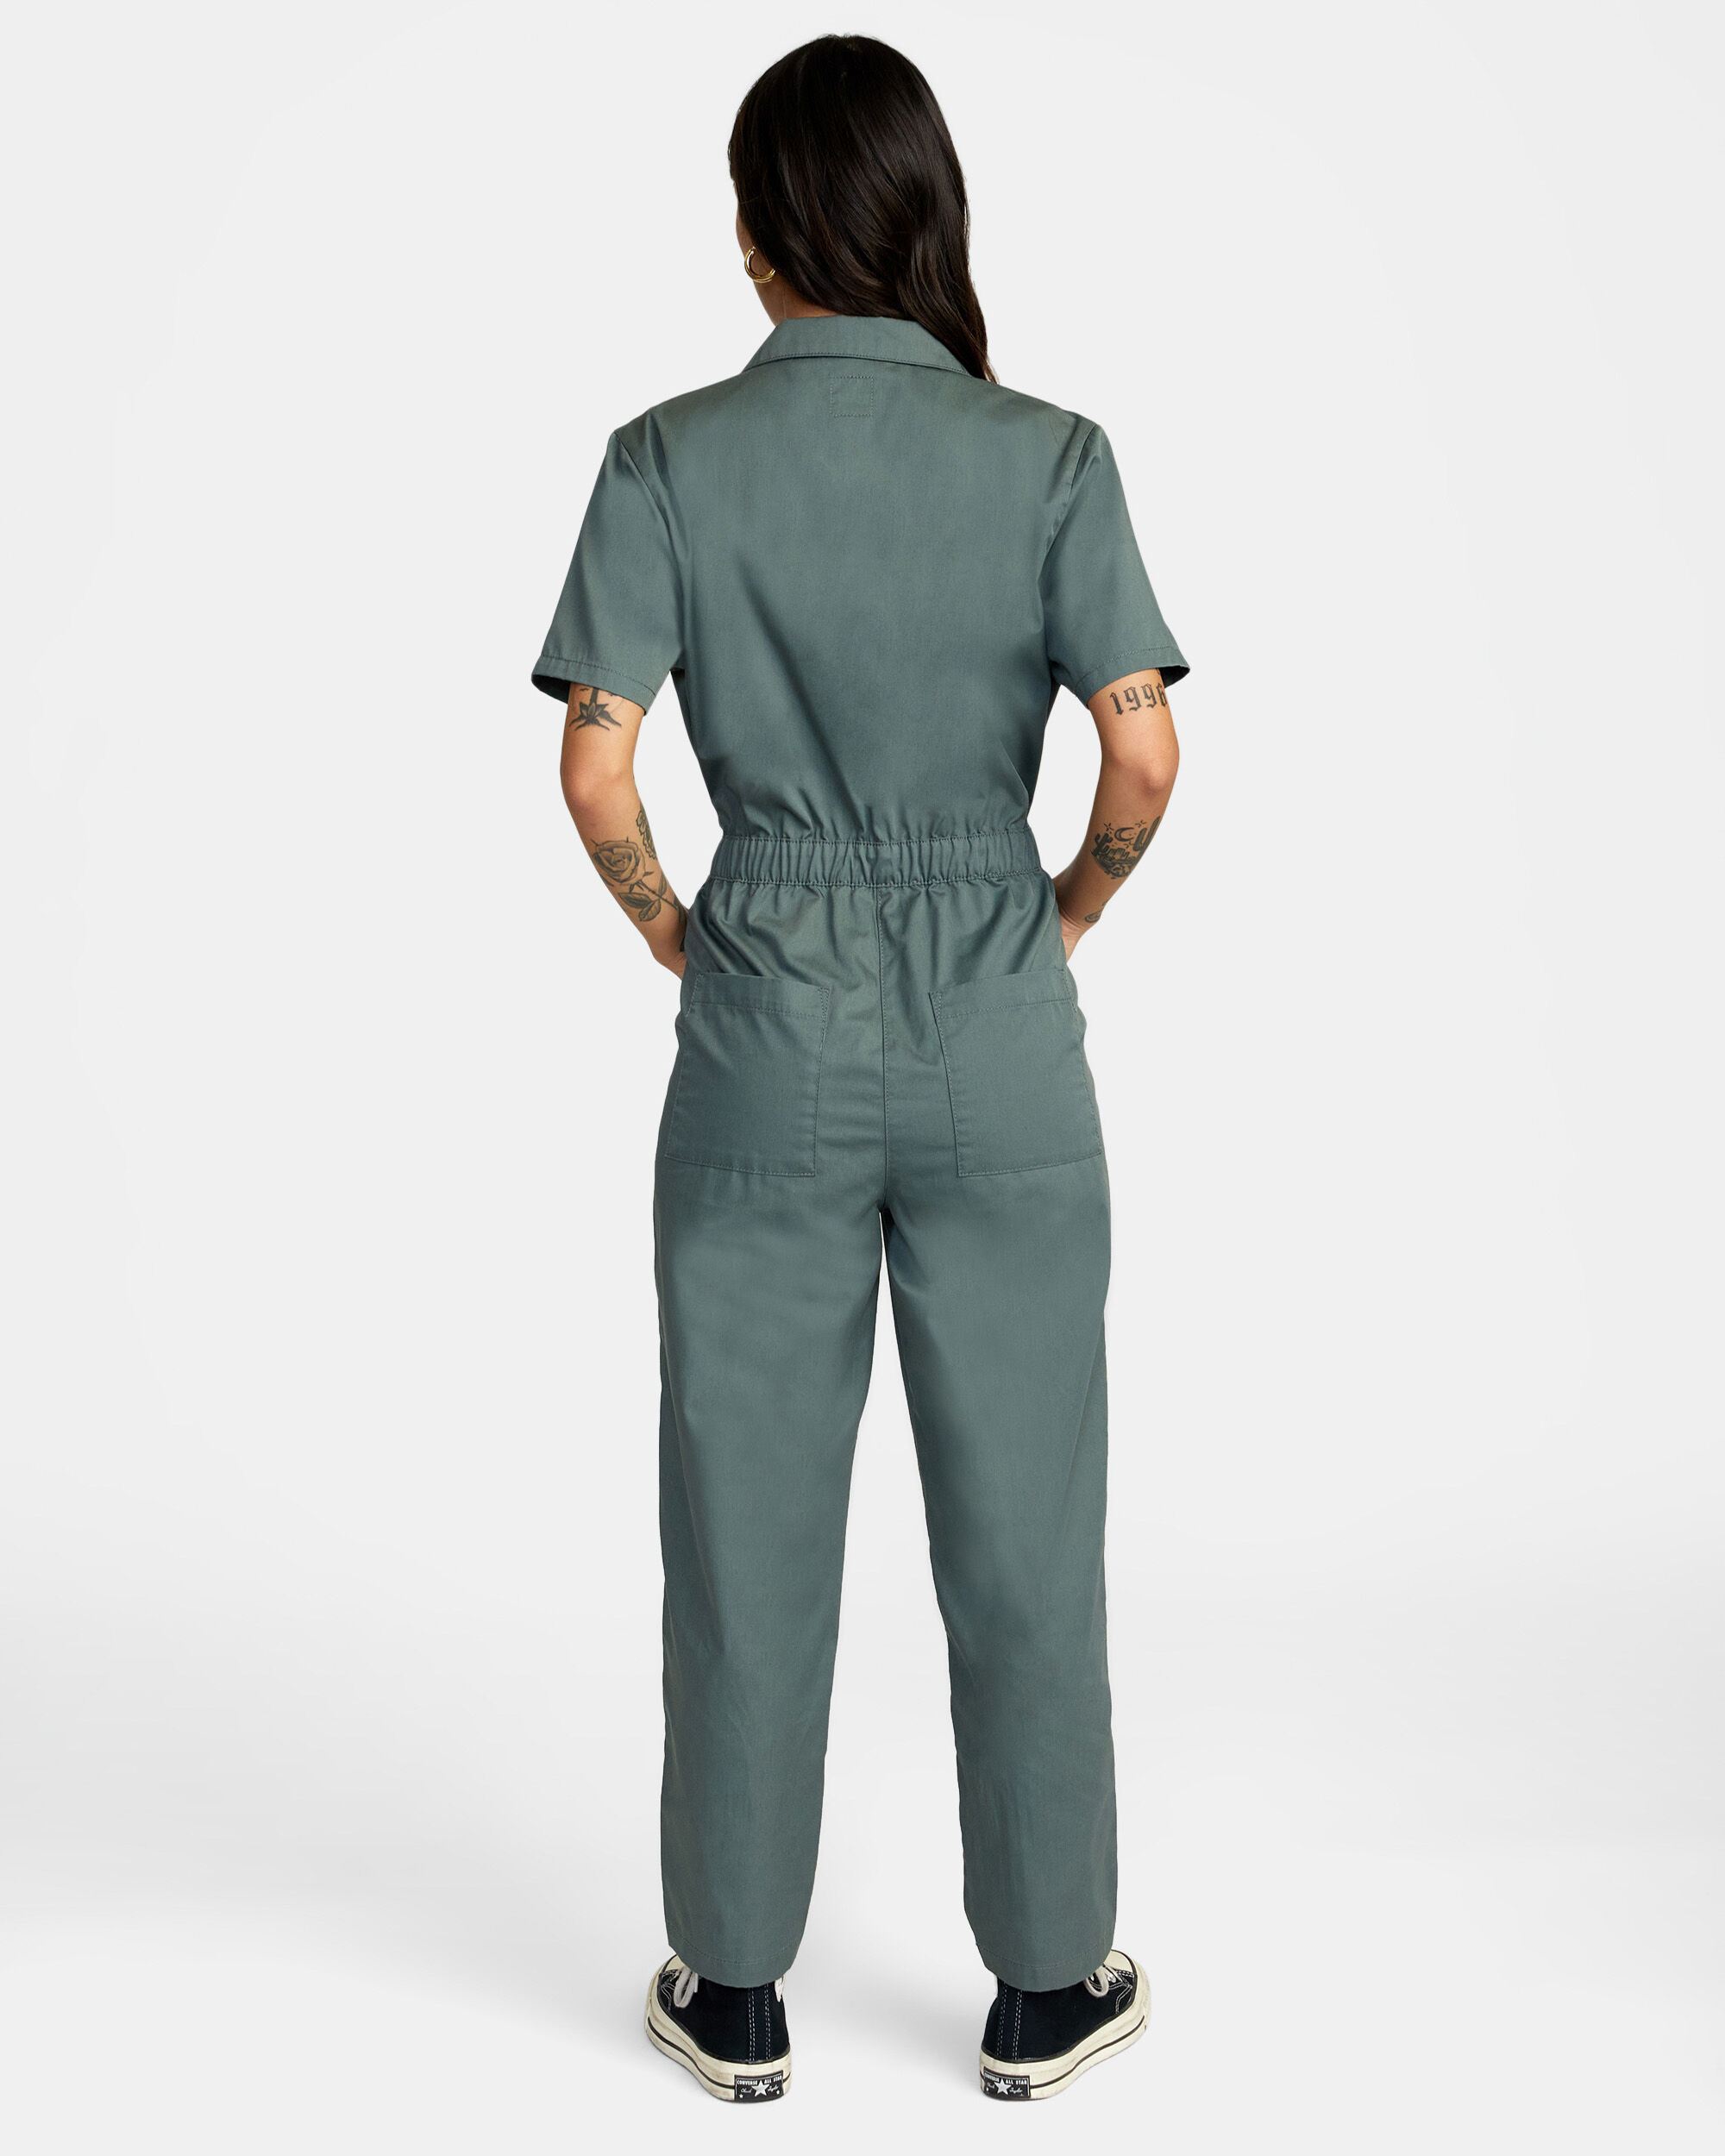 Jumpsuits  Look Good in the Anna Field NZ Collection Anna field bags  offer classic fashion for women